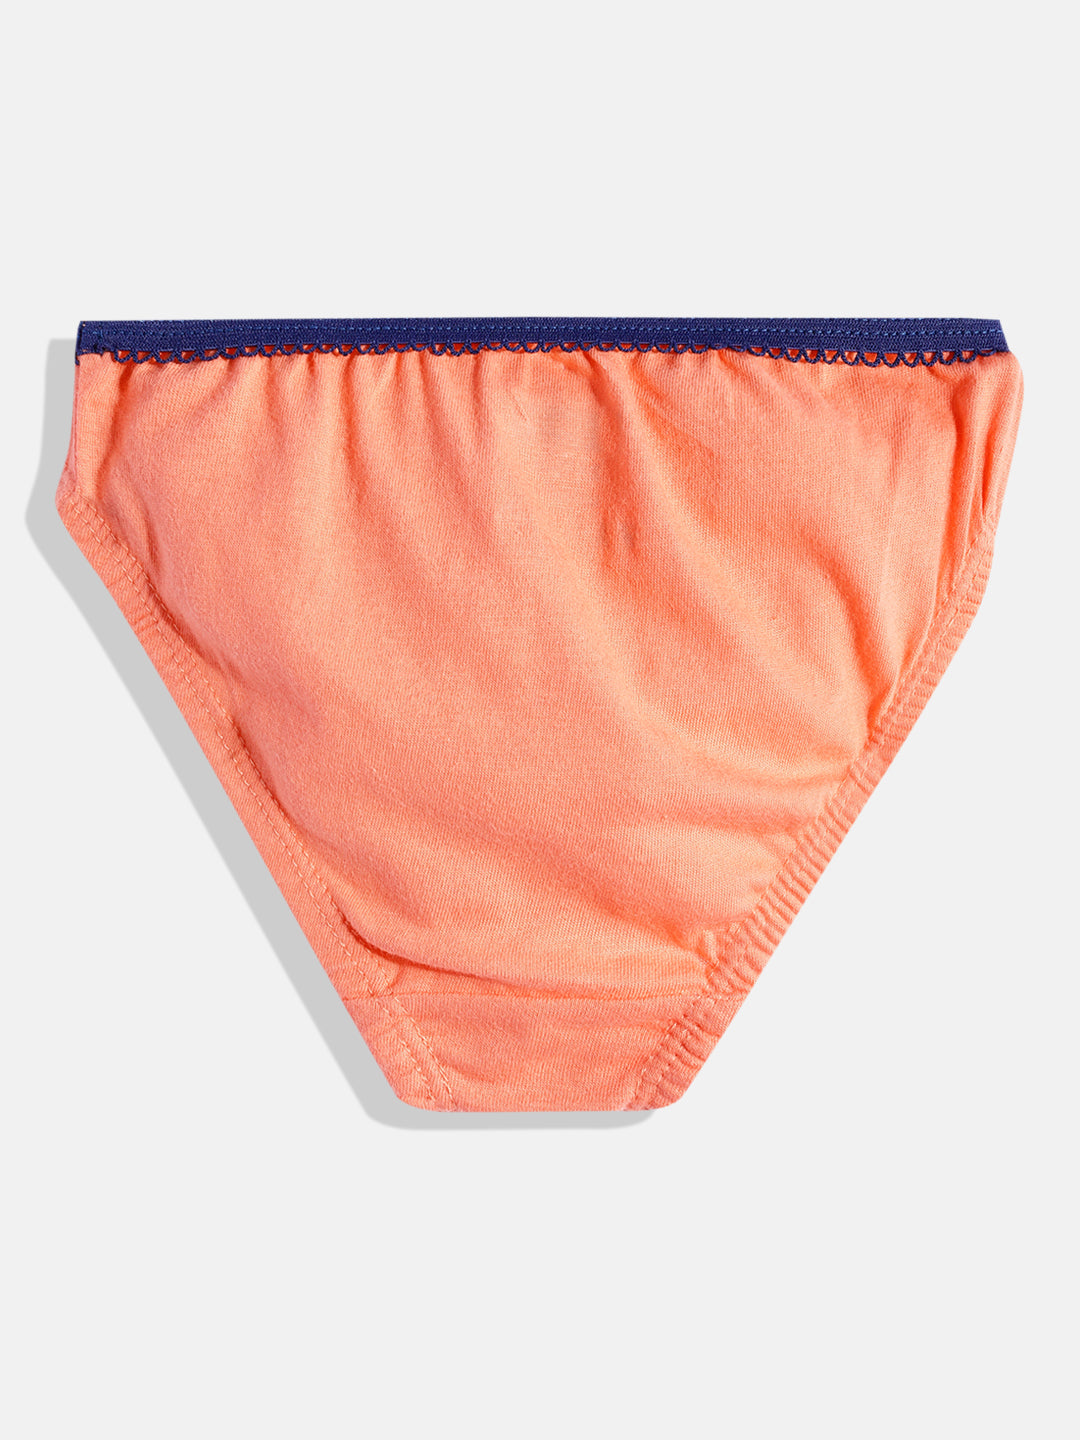 Girls Brief - Pack of 3